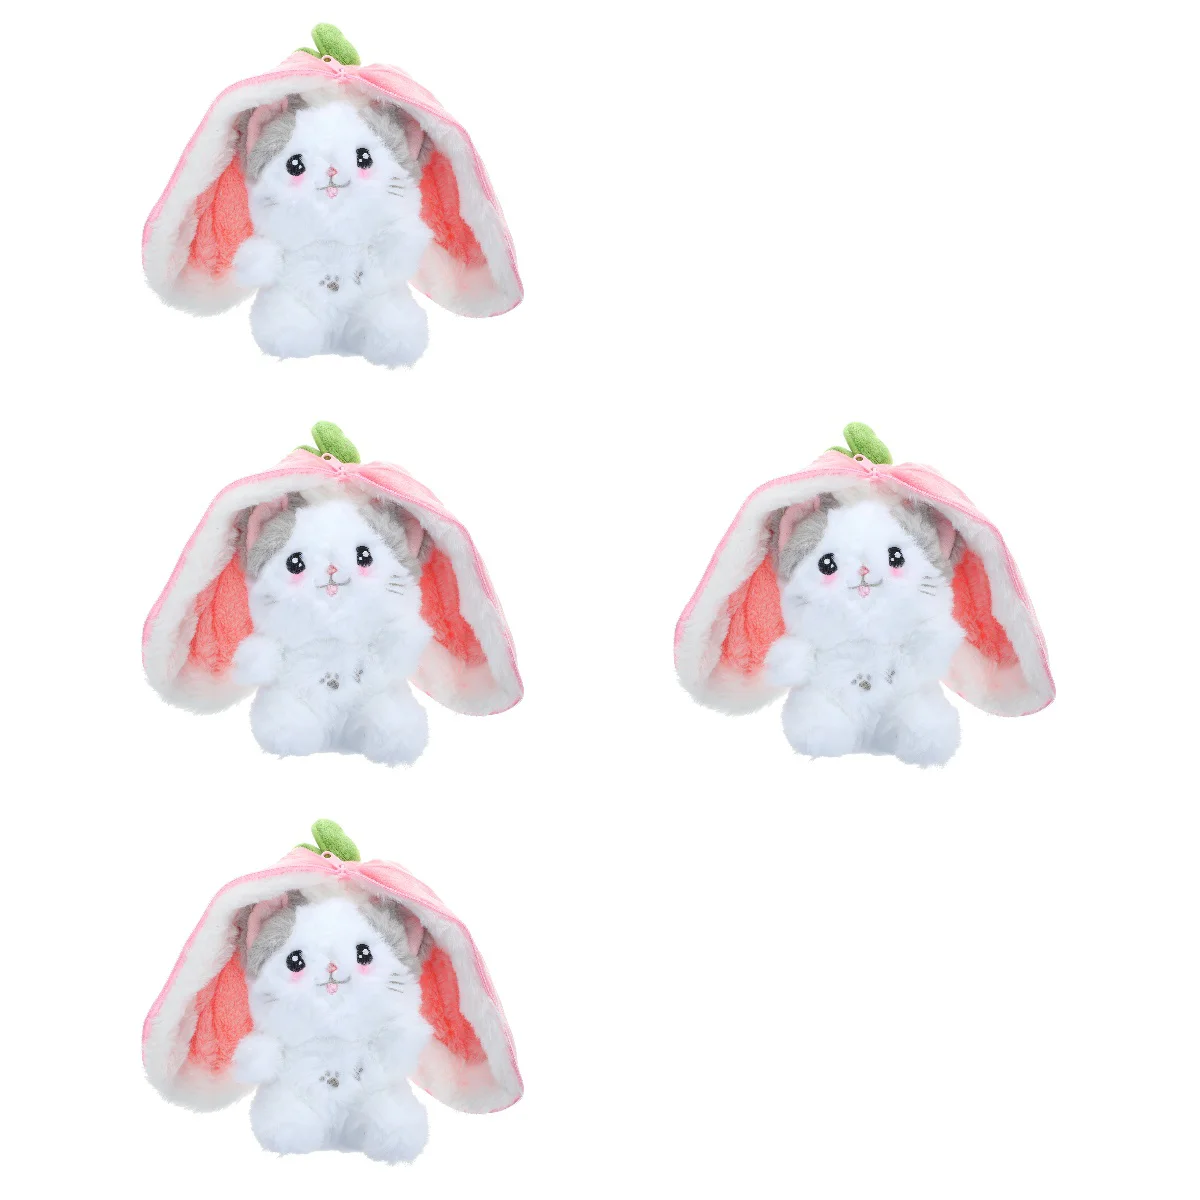 

4 Pieces Strawberry Cat Animal Stuffed Home Decors Kids Bee Plush Adorable Abs Child Pillows